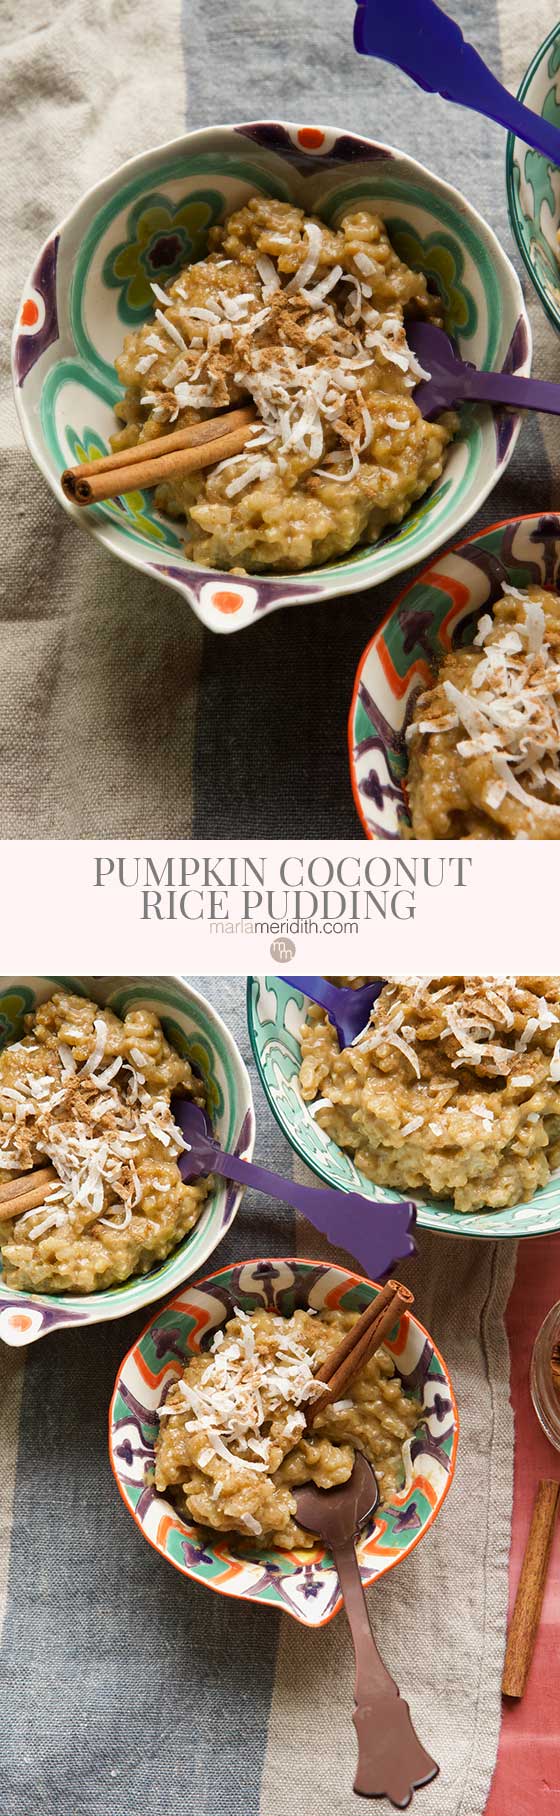 Looking for an easy & delicious recipe that captures all those delicious, cozy fall flavors? Look no further than this Coconut Pumpkin Rice Pudding. It's naturally sweetened with pure maple syrup and is also vegan & gluten free. MarlaMeridith.com